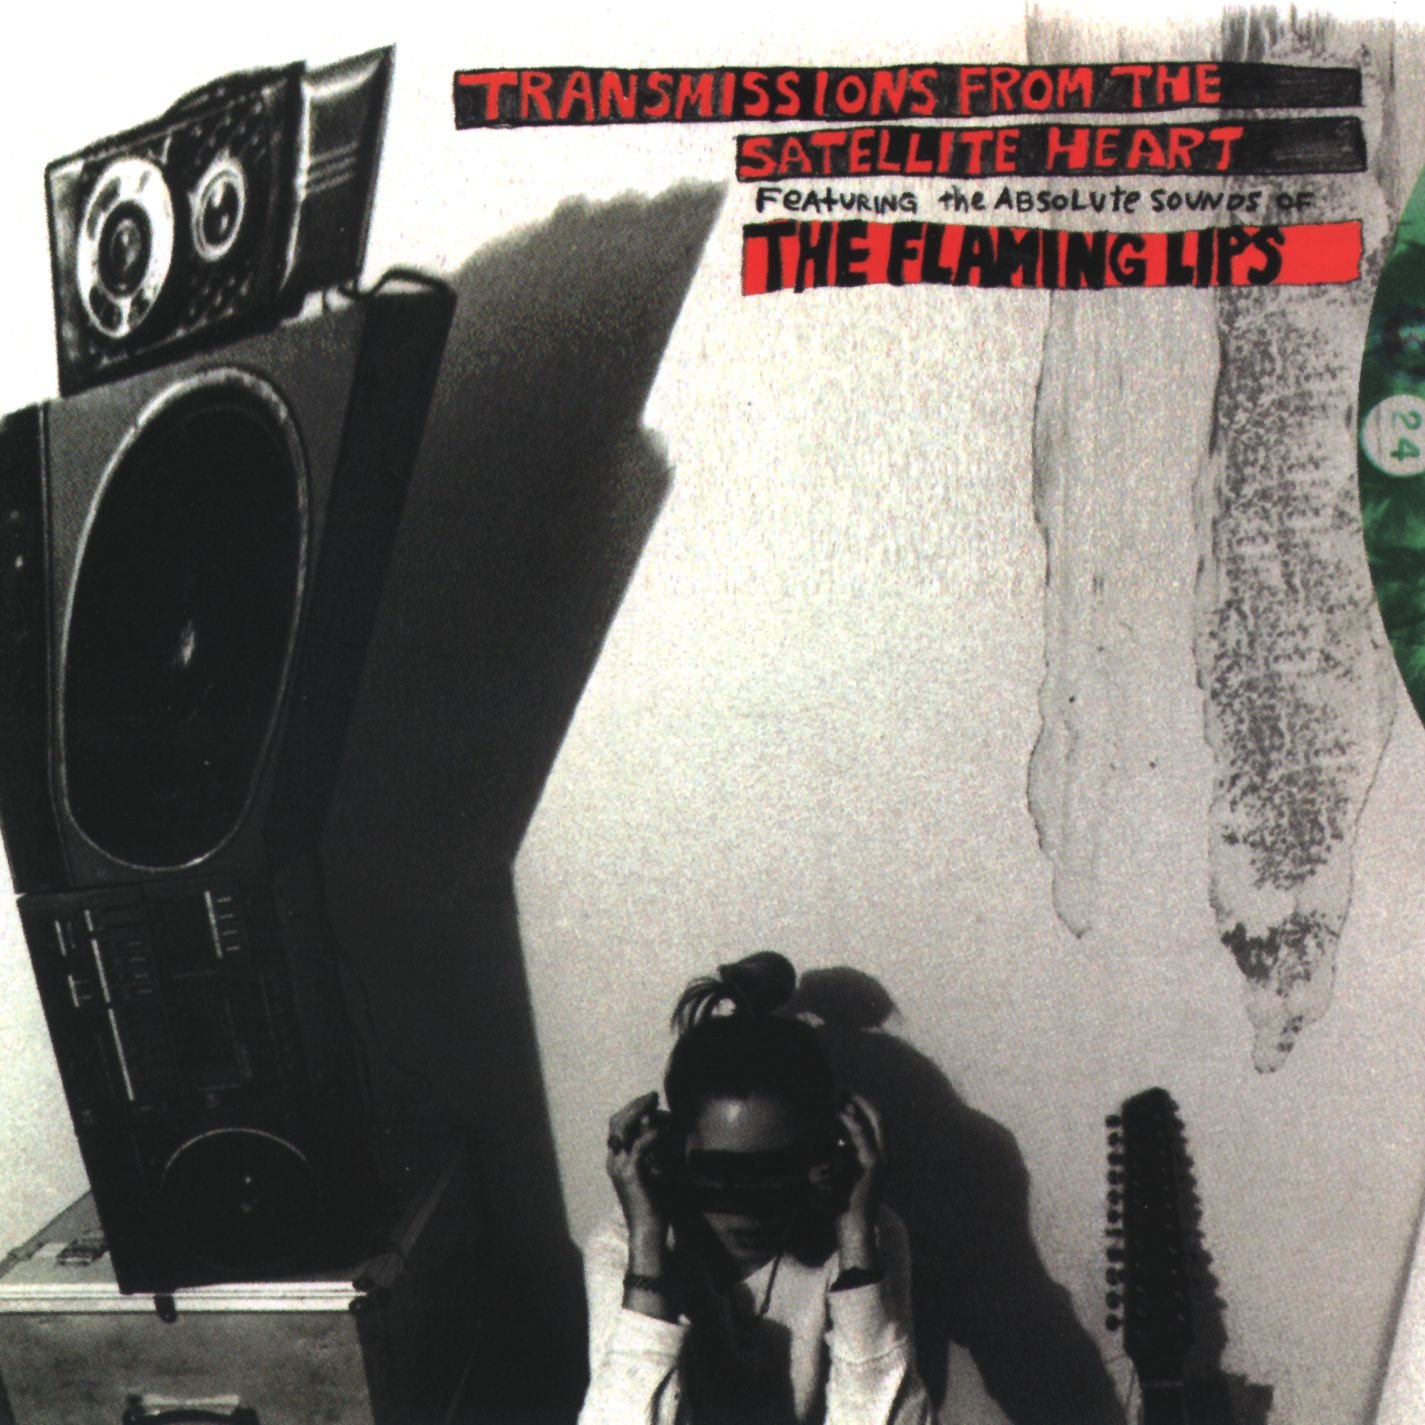 The Flaming Lips "Transmissions From The Satellite Heart" Grey LP